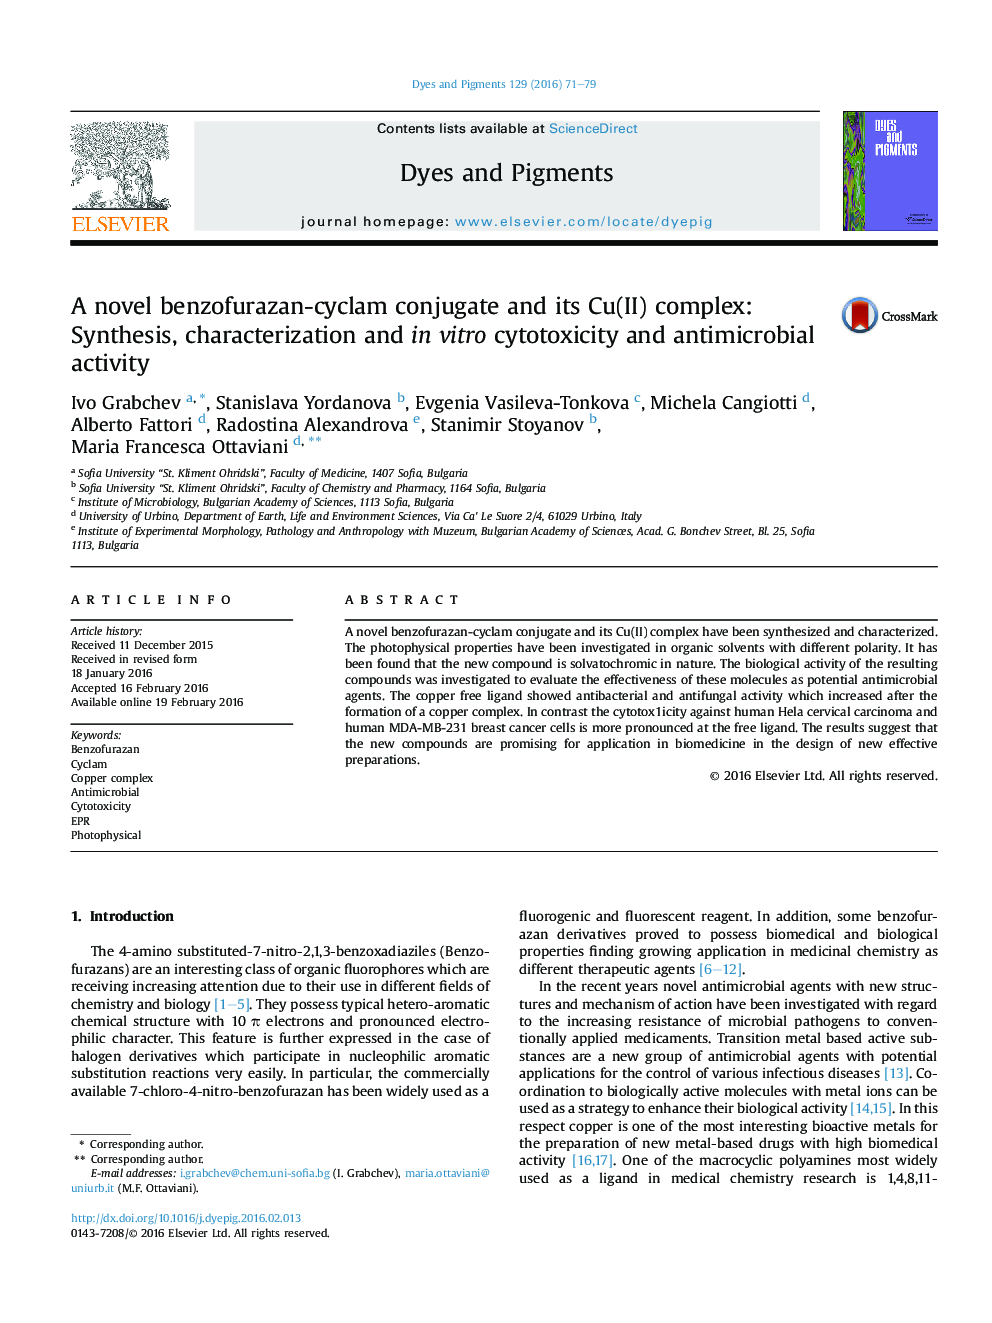 A novel benzofurazan-cyclam conjugate and its Cu(II) complex: Synthesis, characterization and in vitro cytotoxicity and antimicrobial activity